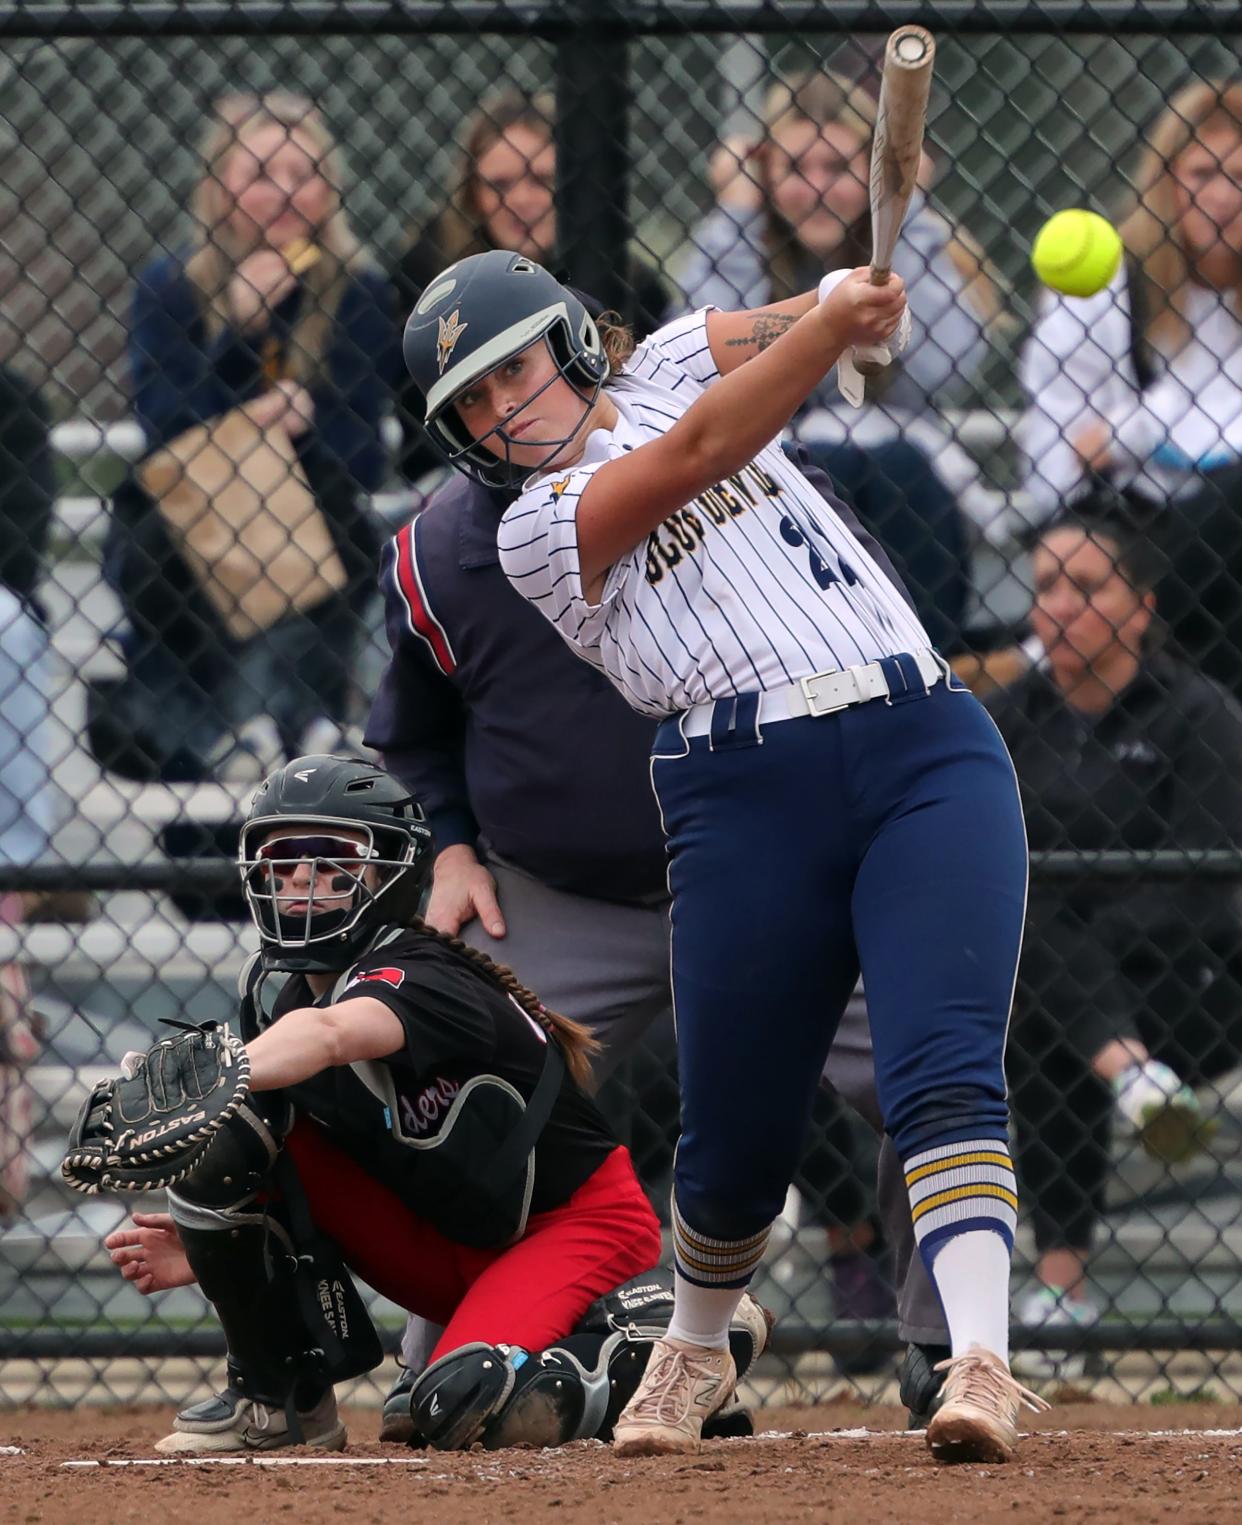 Tallmadge's Kathryn Headrick hits a single to left field during the second inning of a game against Kent Roosevelt on April 10 in Tallmadge.